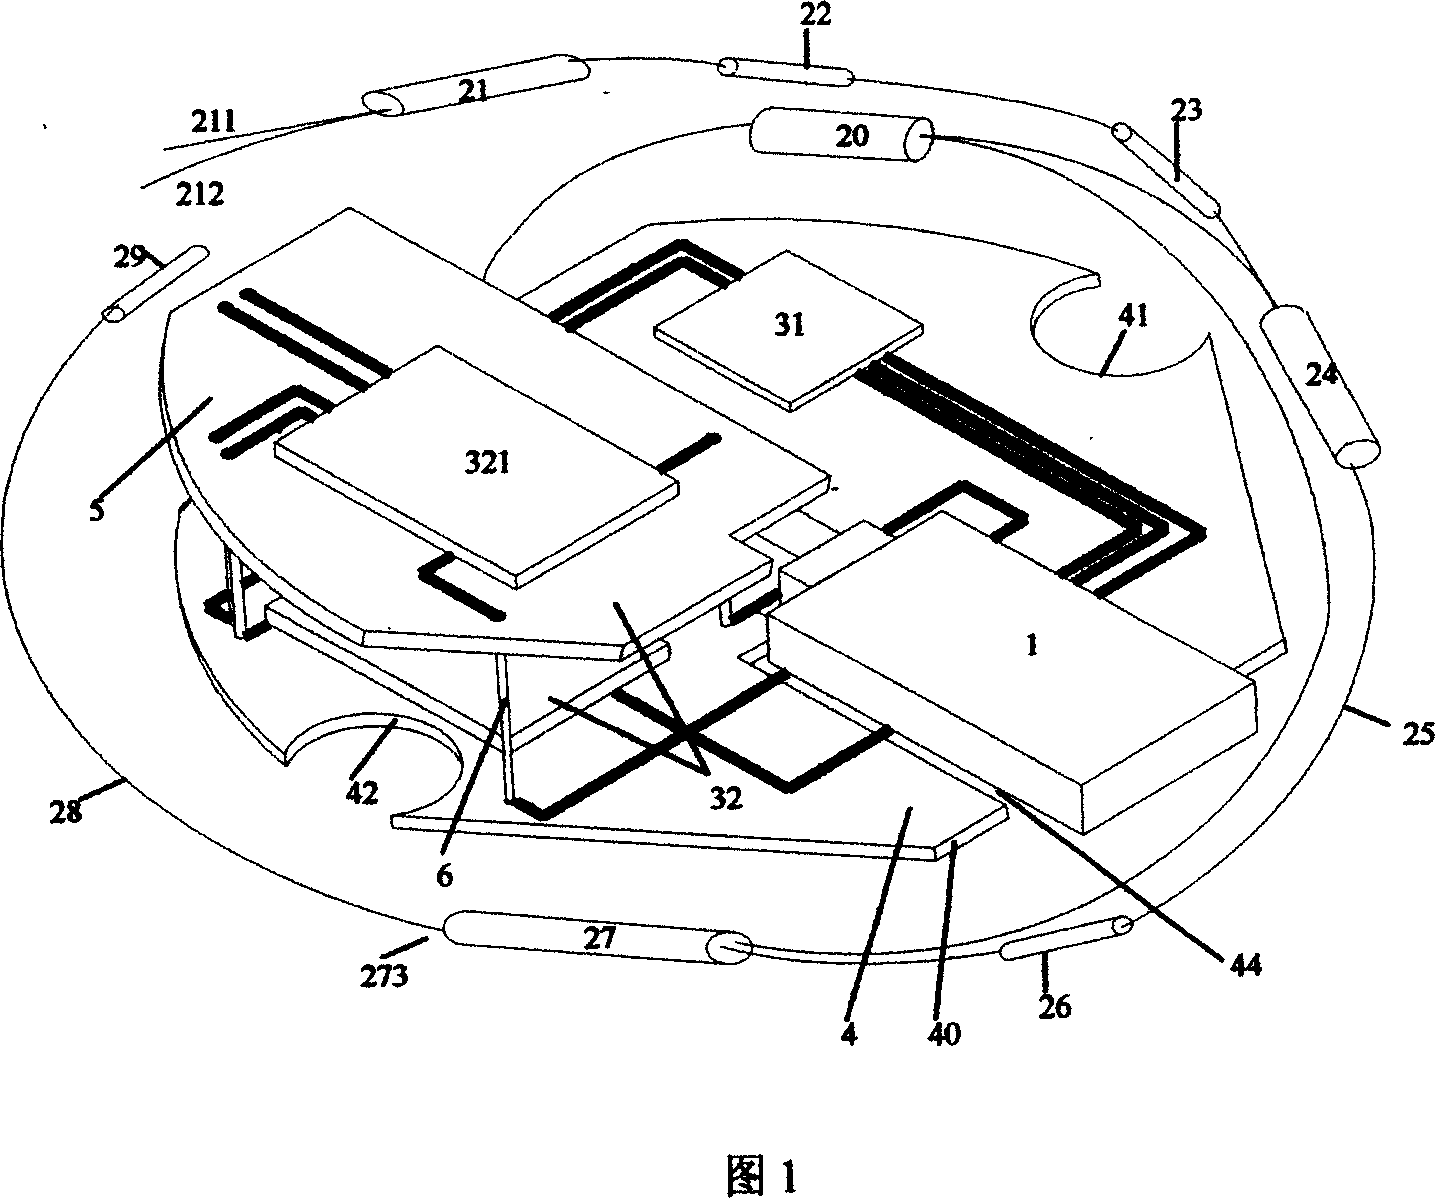 Double-layer structural wideband light source